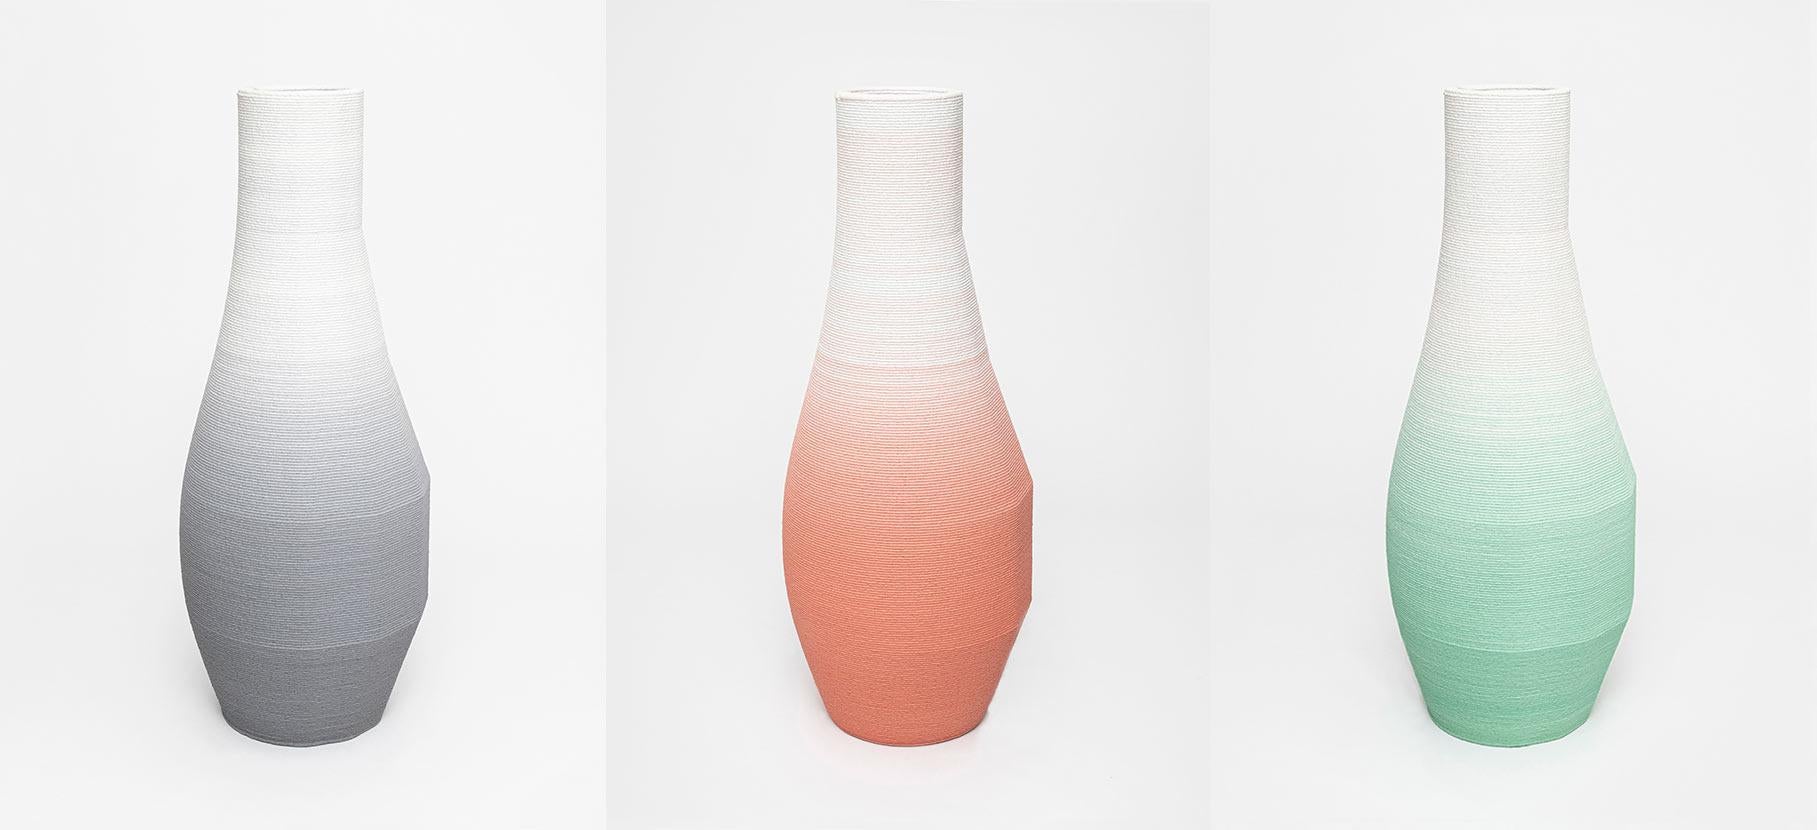 Large gradient vase by Philipp Aduatz
Limited Edition of 50
Dimensions: 60 x 60 x 152 cm
Materials: 3D printed concrete dyed

Available in red, blue, beige, green and black.

The 3D printed gradient furniture collection is Philipp Aduatz